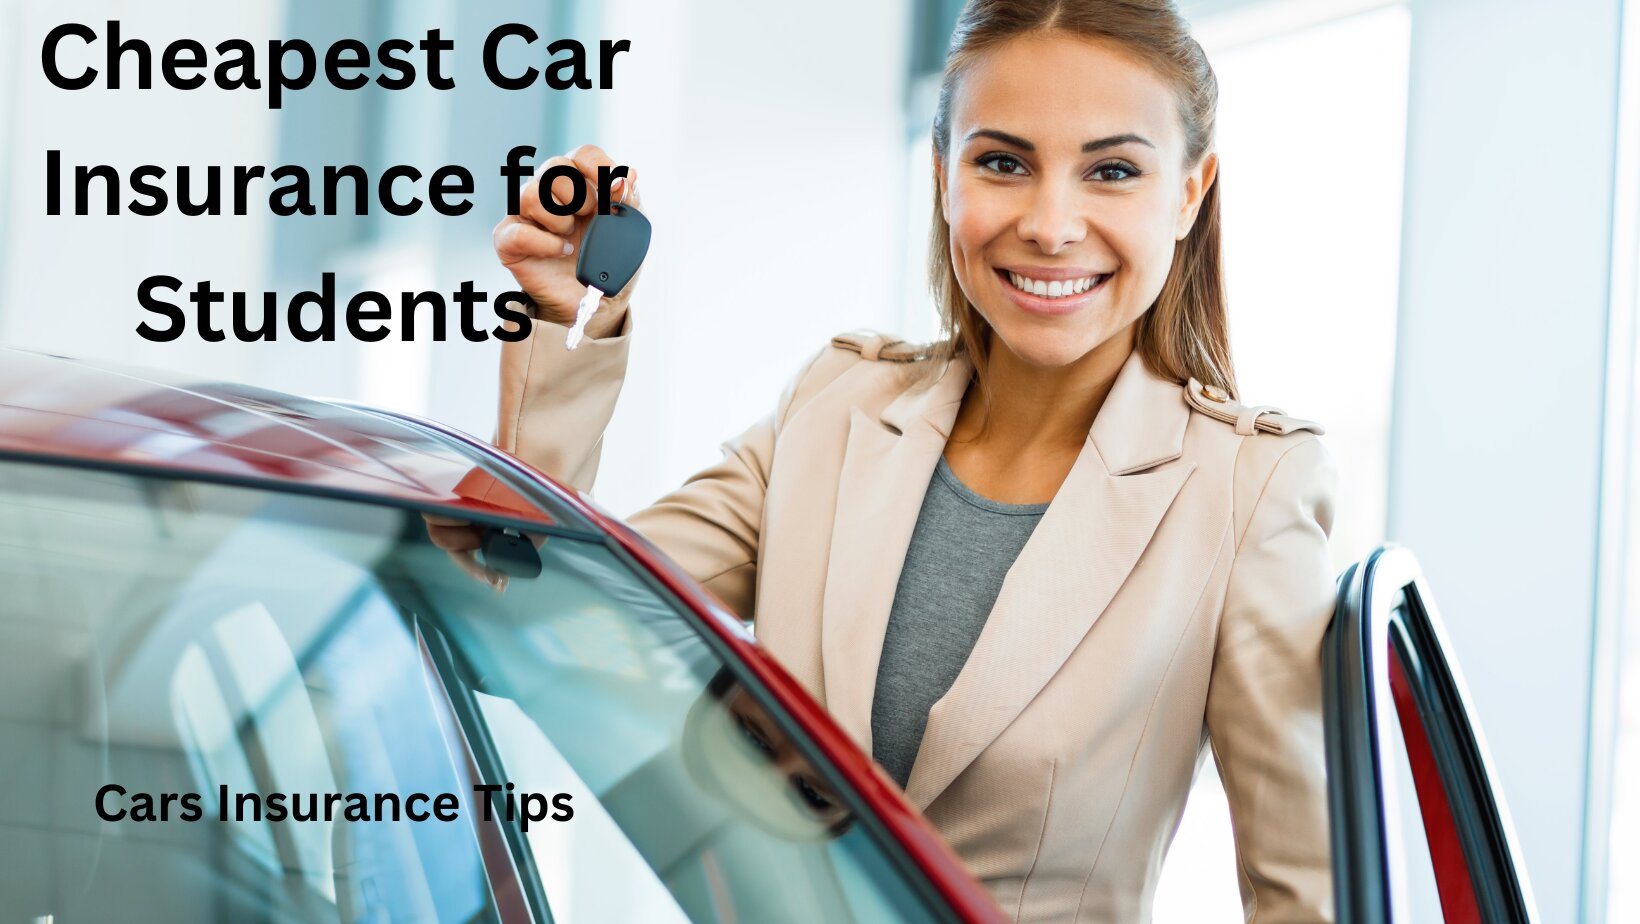 Cheapest Car Insurance for Students